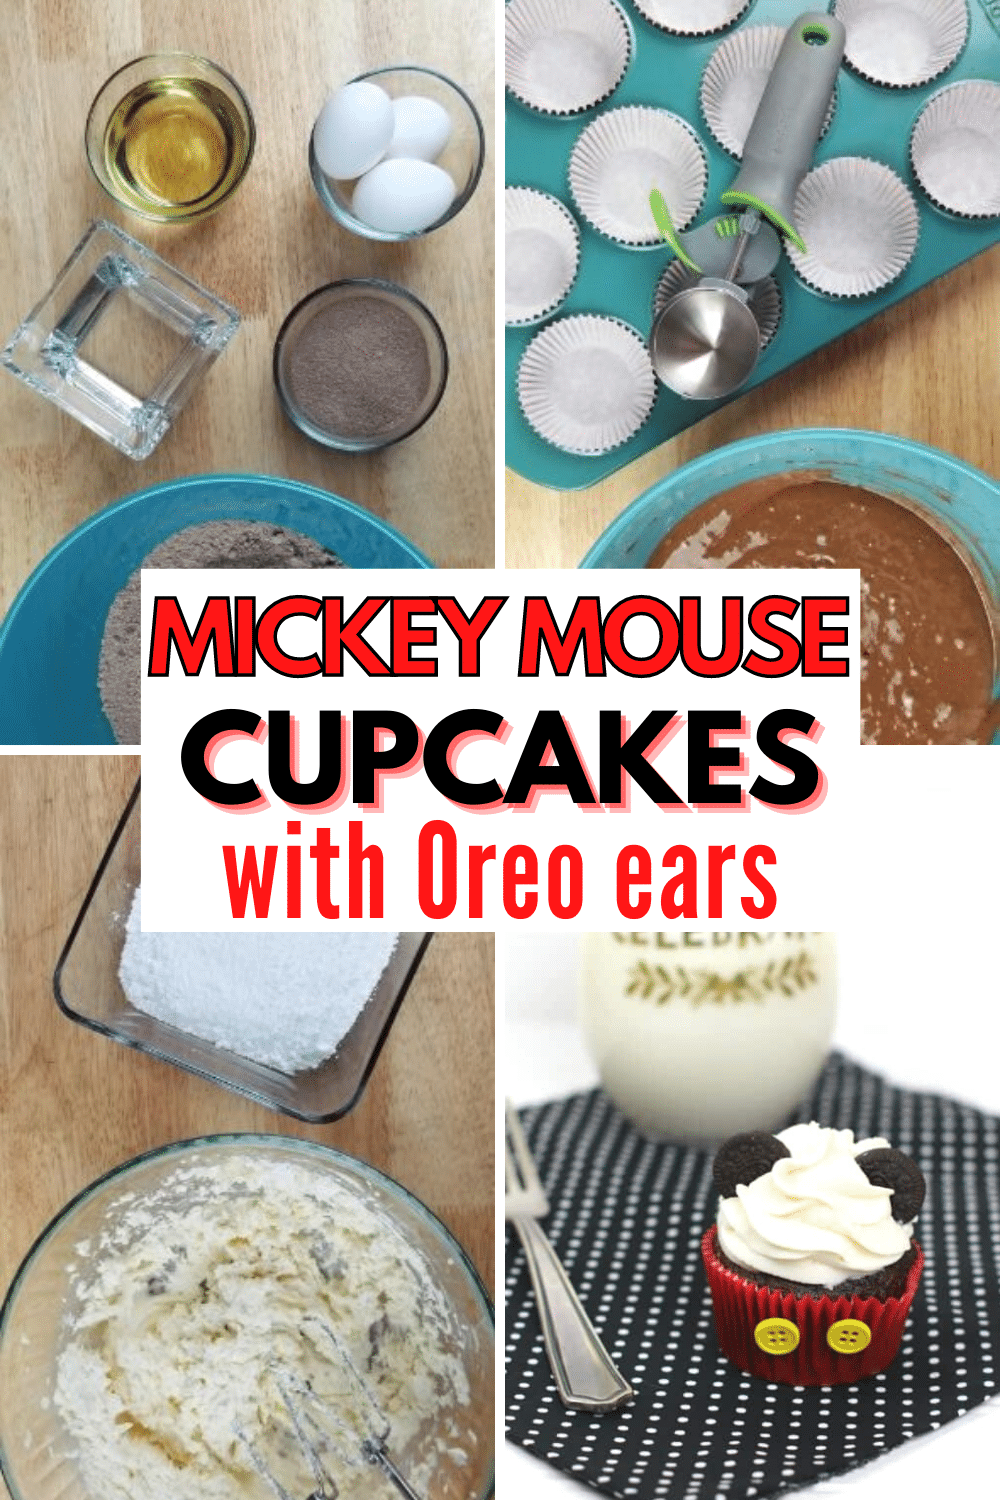 These Mickey Mouse Cupcakes are perfect for any Disney themed party, any get together, or when watching a new Disney release or a favorite classic. They're easy to make and the kids can help! #mickeymouse #cupcakes #disney #party via @wondermomwannab